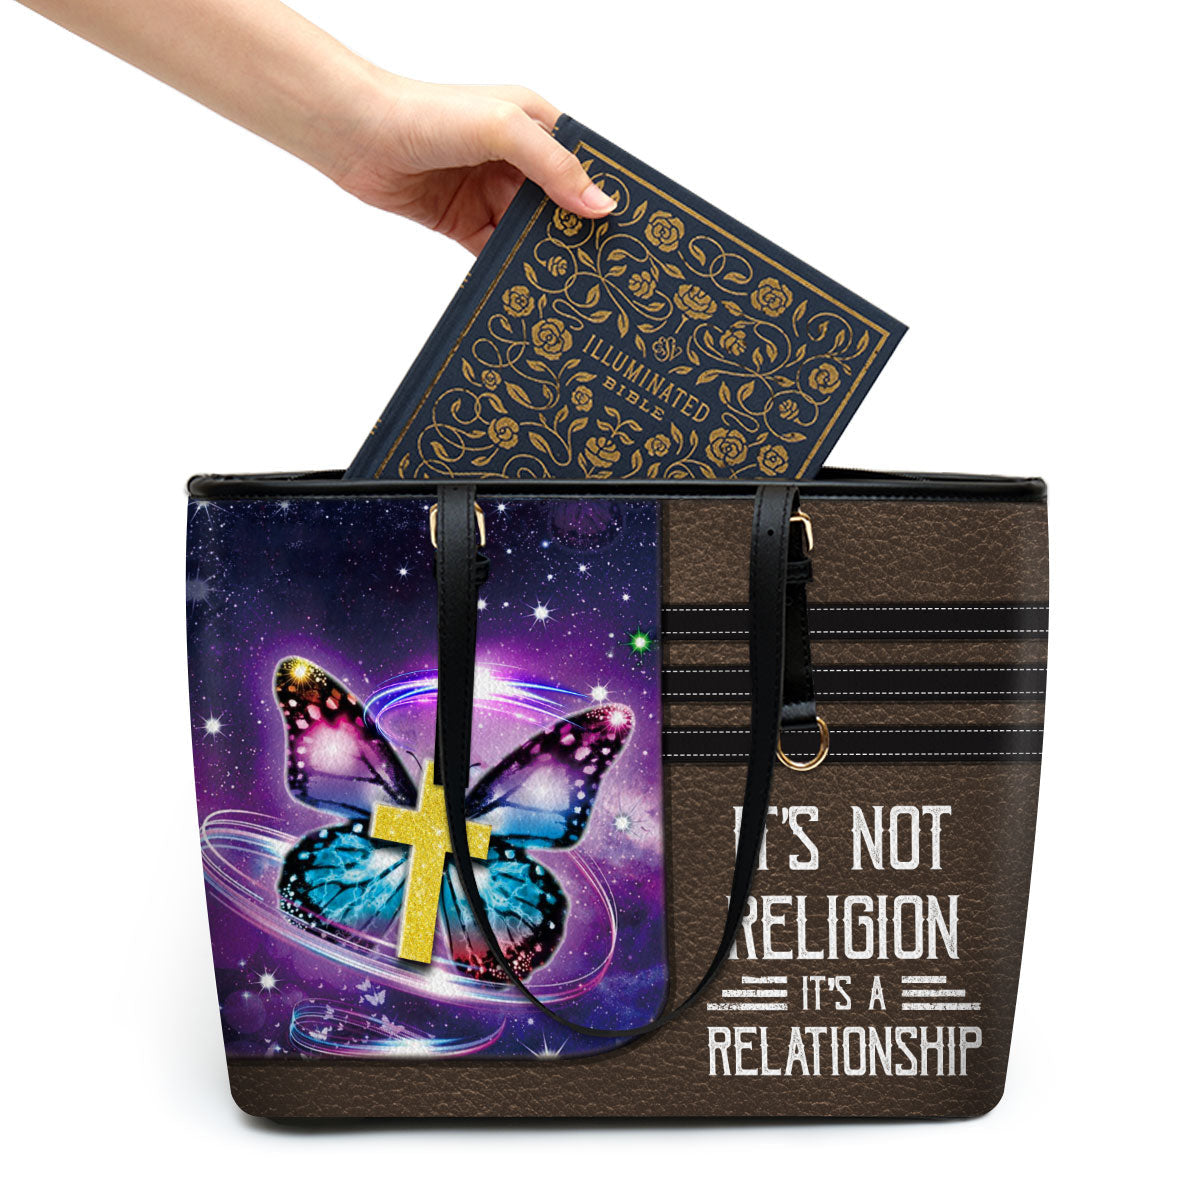 It's Not Religion It's A Relationship Large Leather Tote Bag 1 - Christ Gifts For Religious Women - Best Mother's Day Gifts